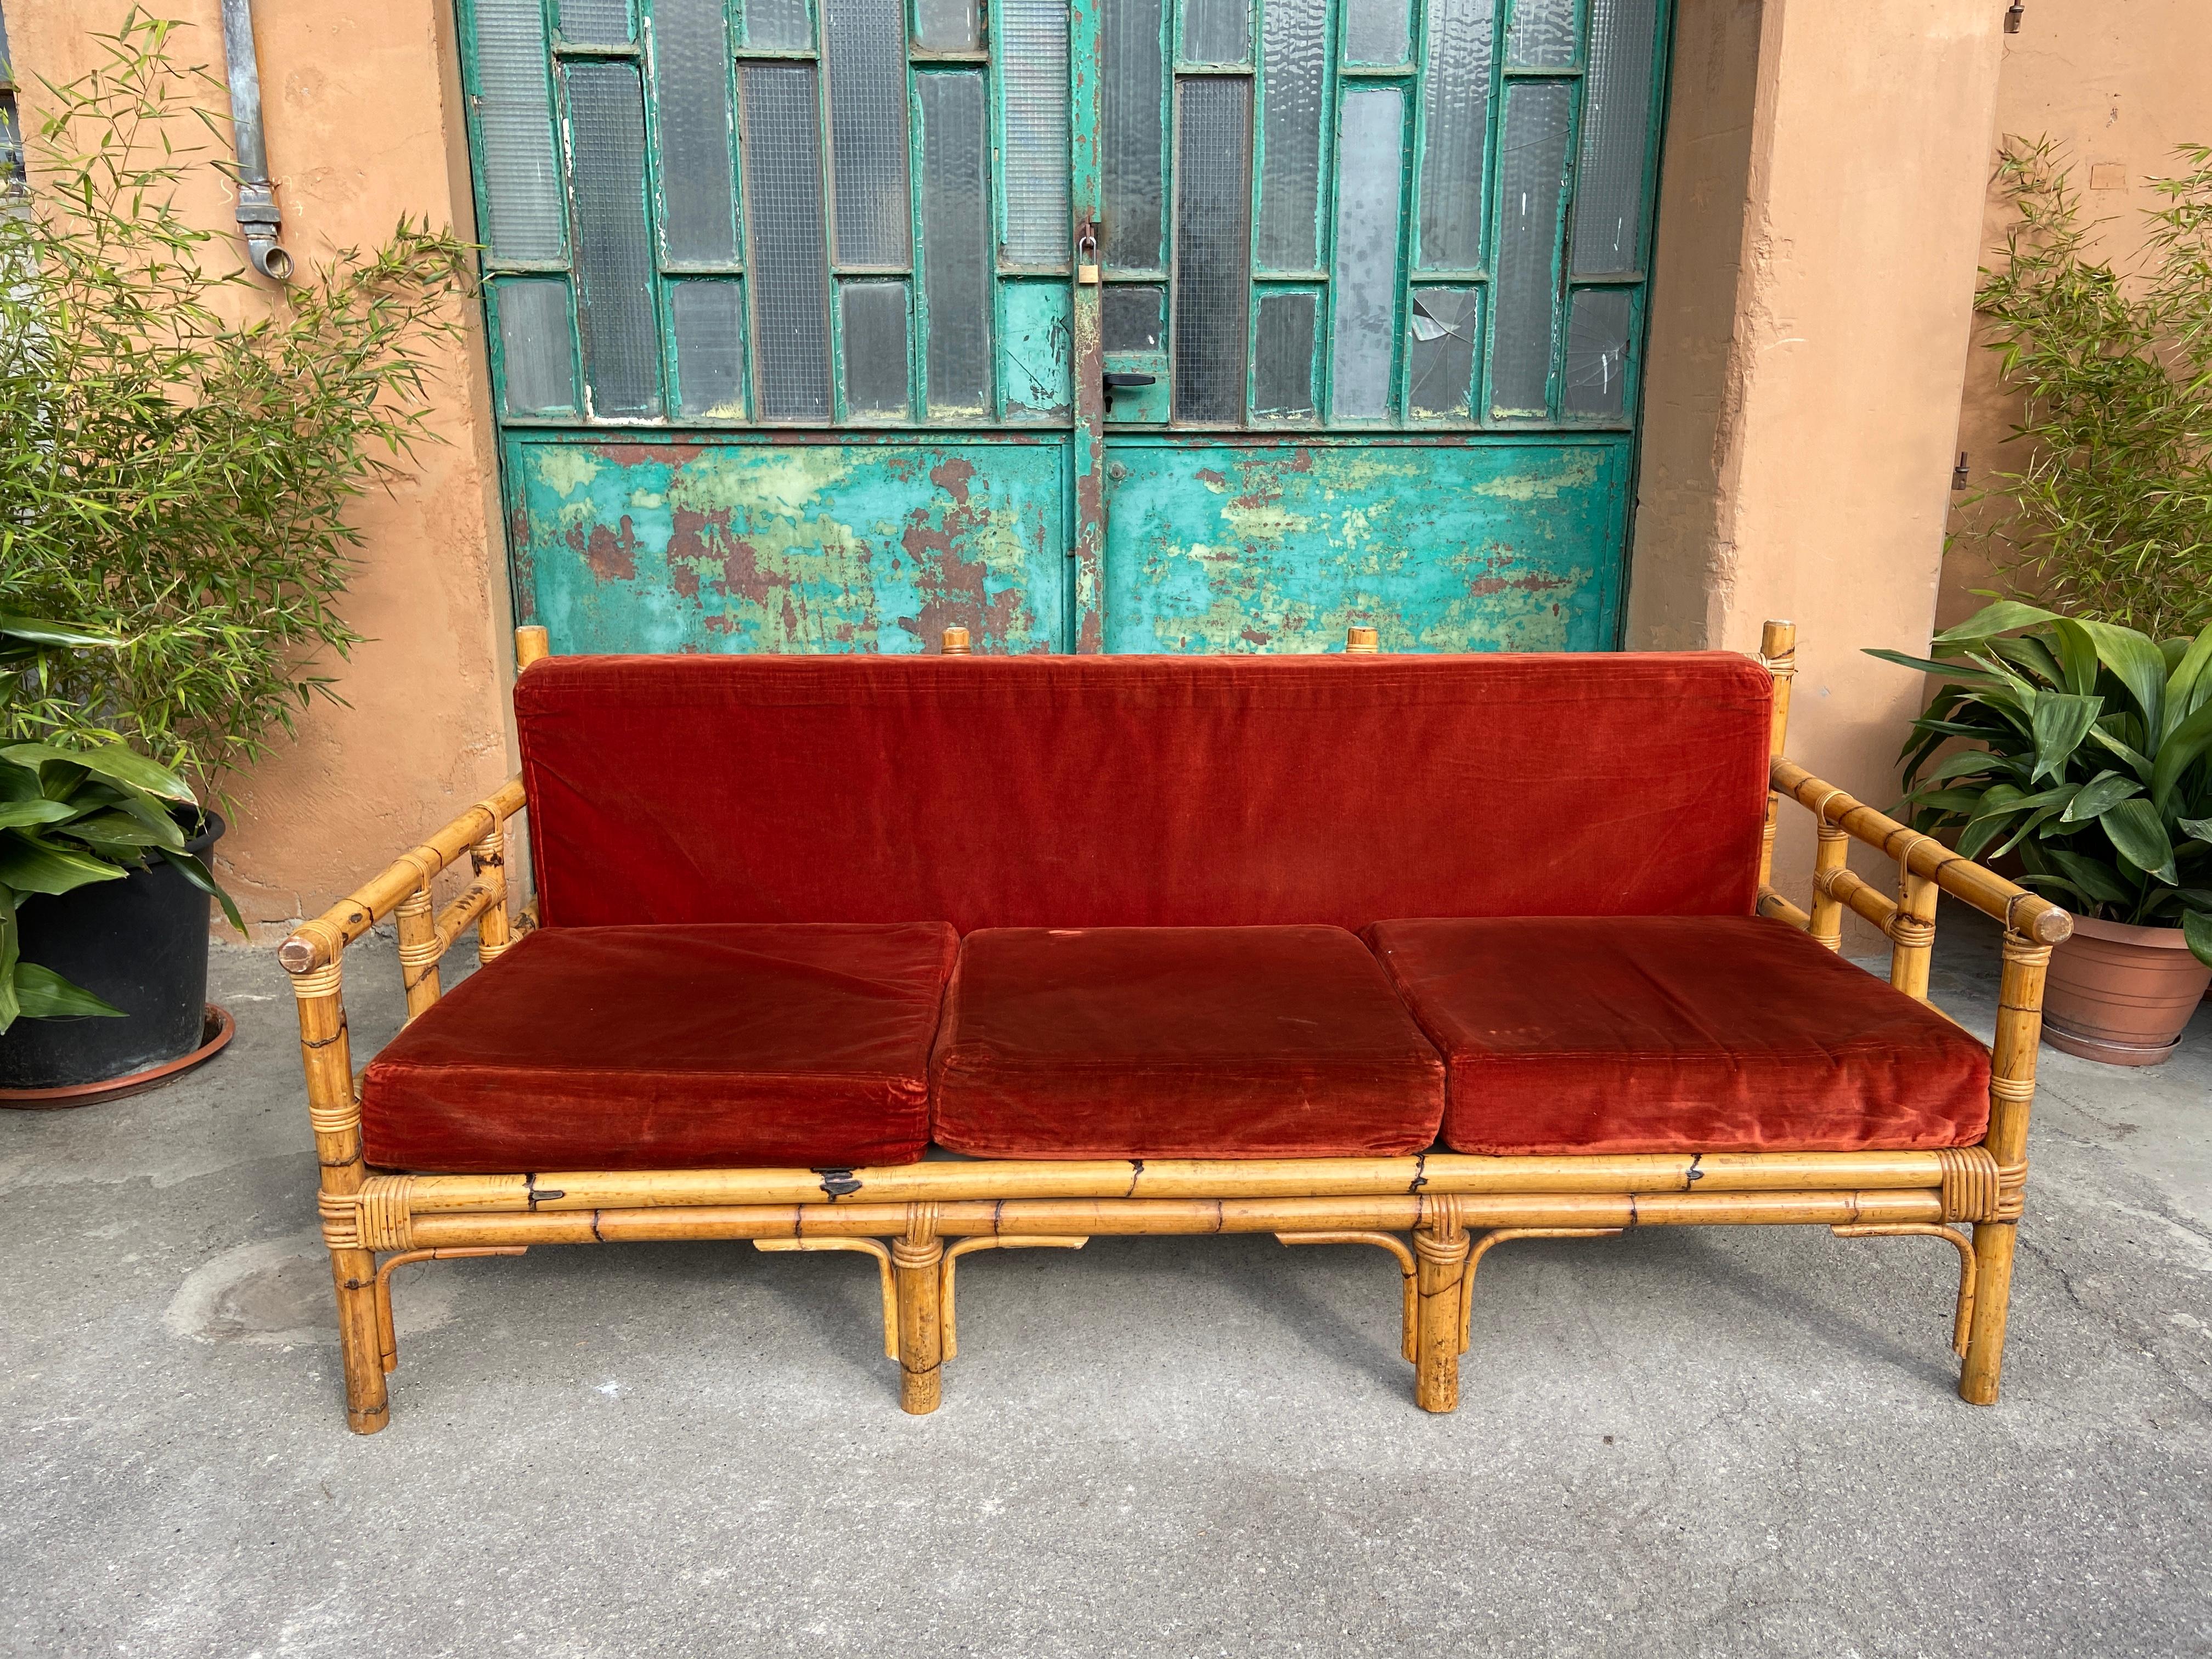 Mid-Century Modern Italian bamboo sofa with its cushions from Vivai del Sud, 1970s.
The Sofa could come with its side table as shown in the photo.
Price on request.
